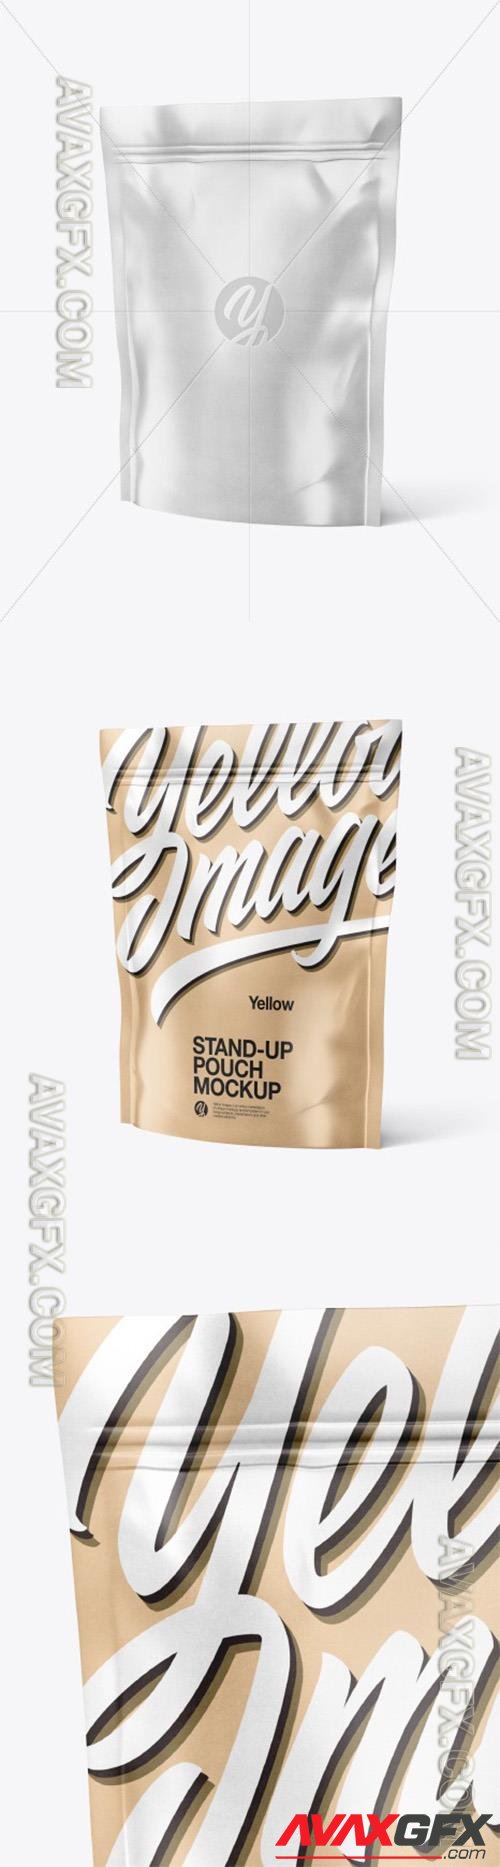 Kraft Stand-Up Pouch Mockup 48095 TIF